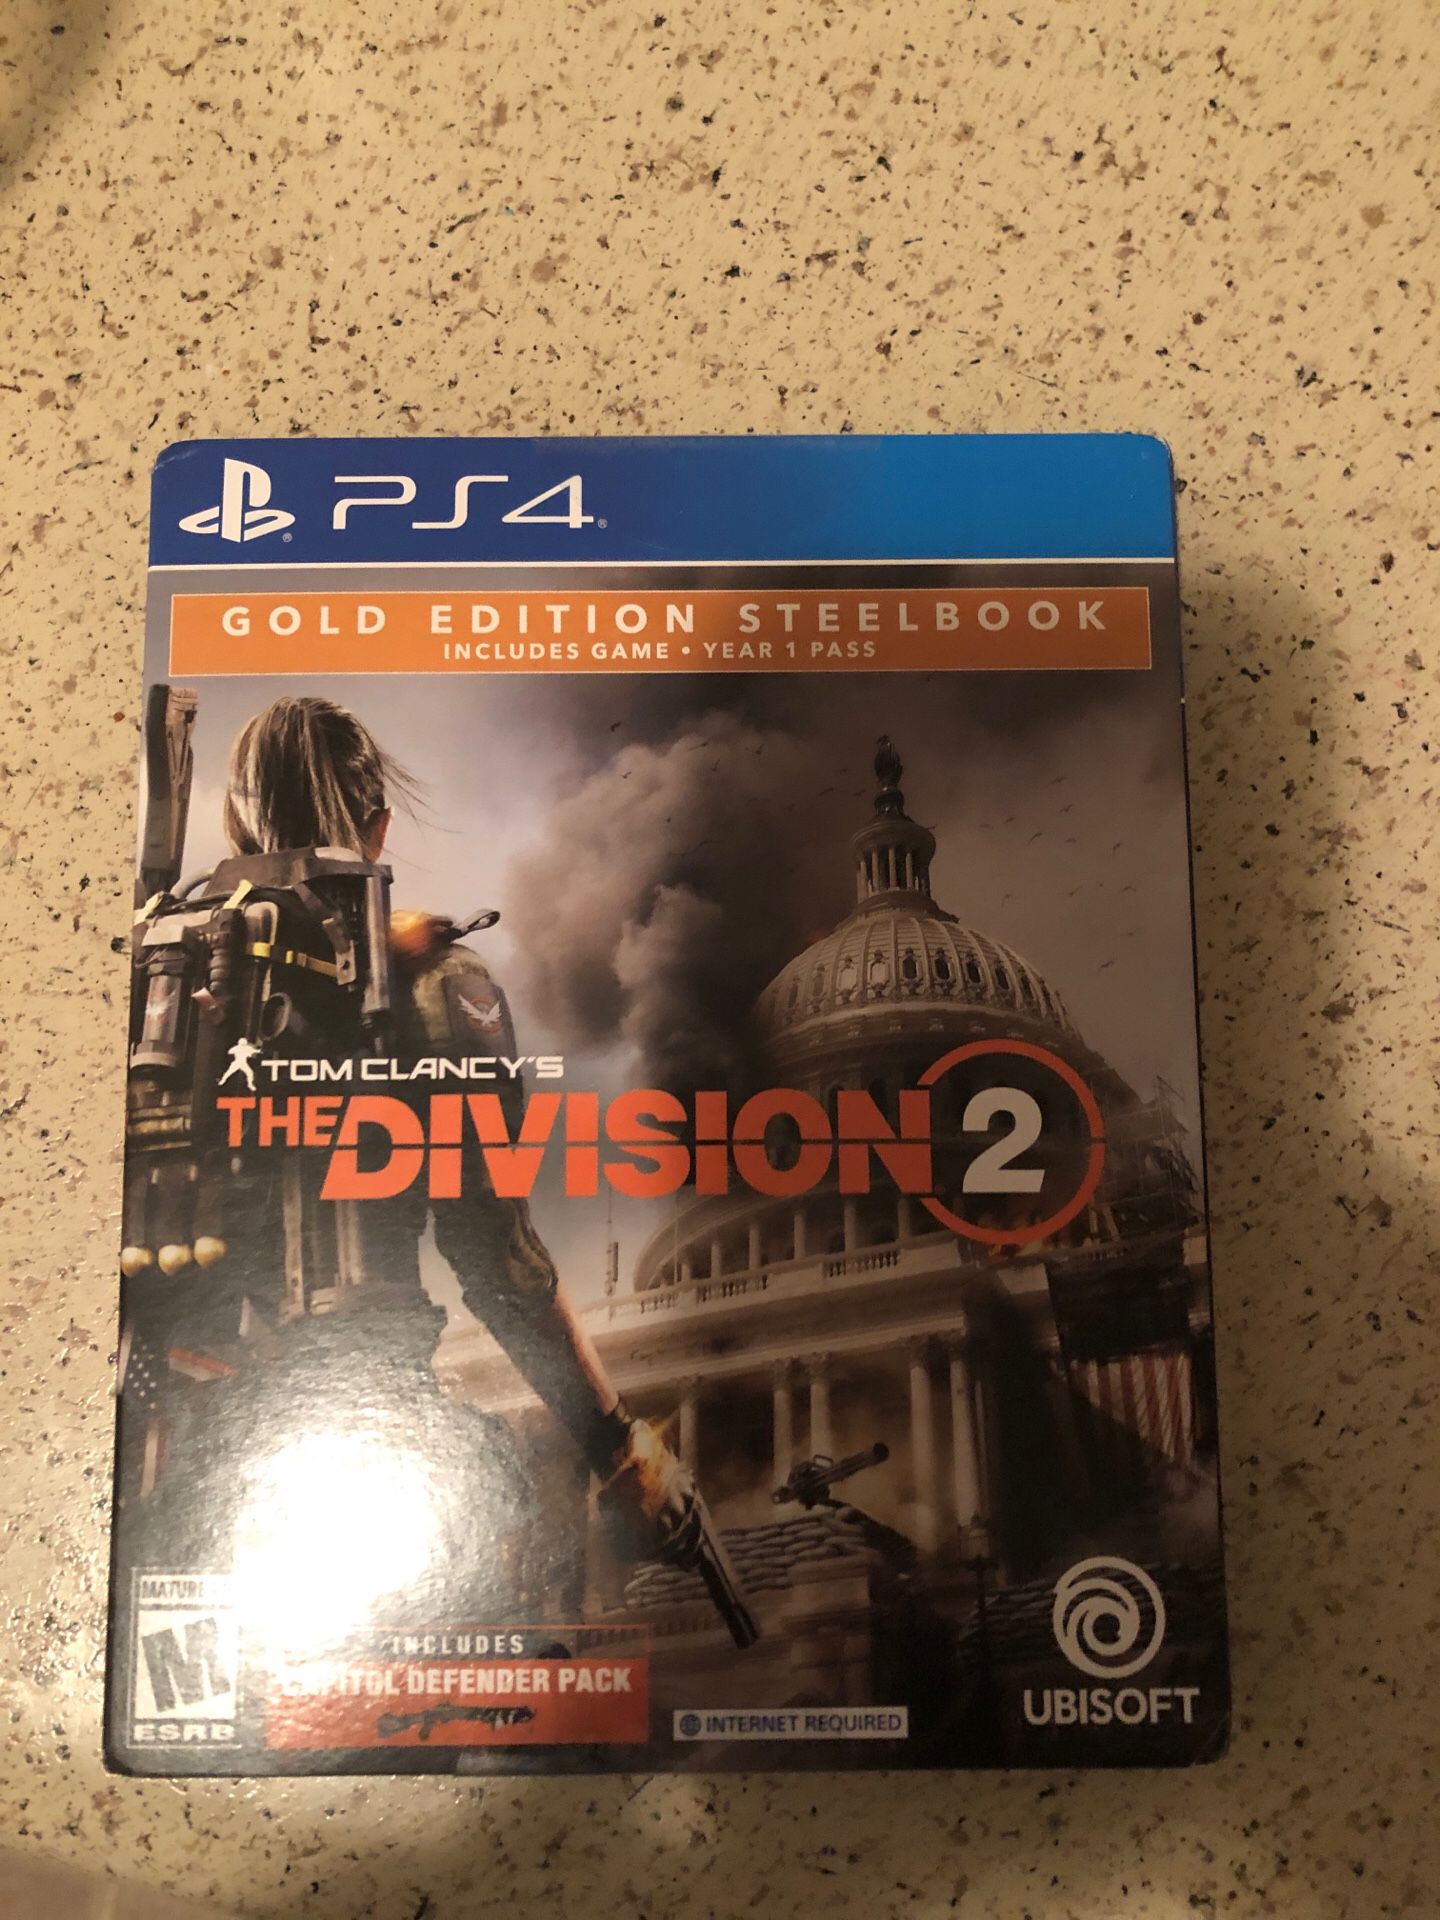 Ps4 Gold Edition Steelbook Tom Clancy The Division 2 For Sale In Chesterfield Mo Offerup